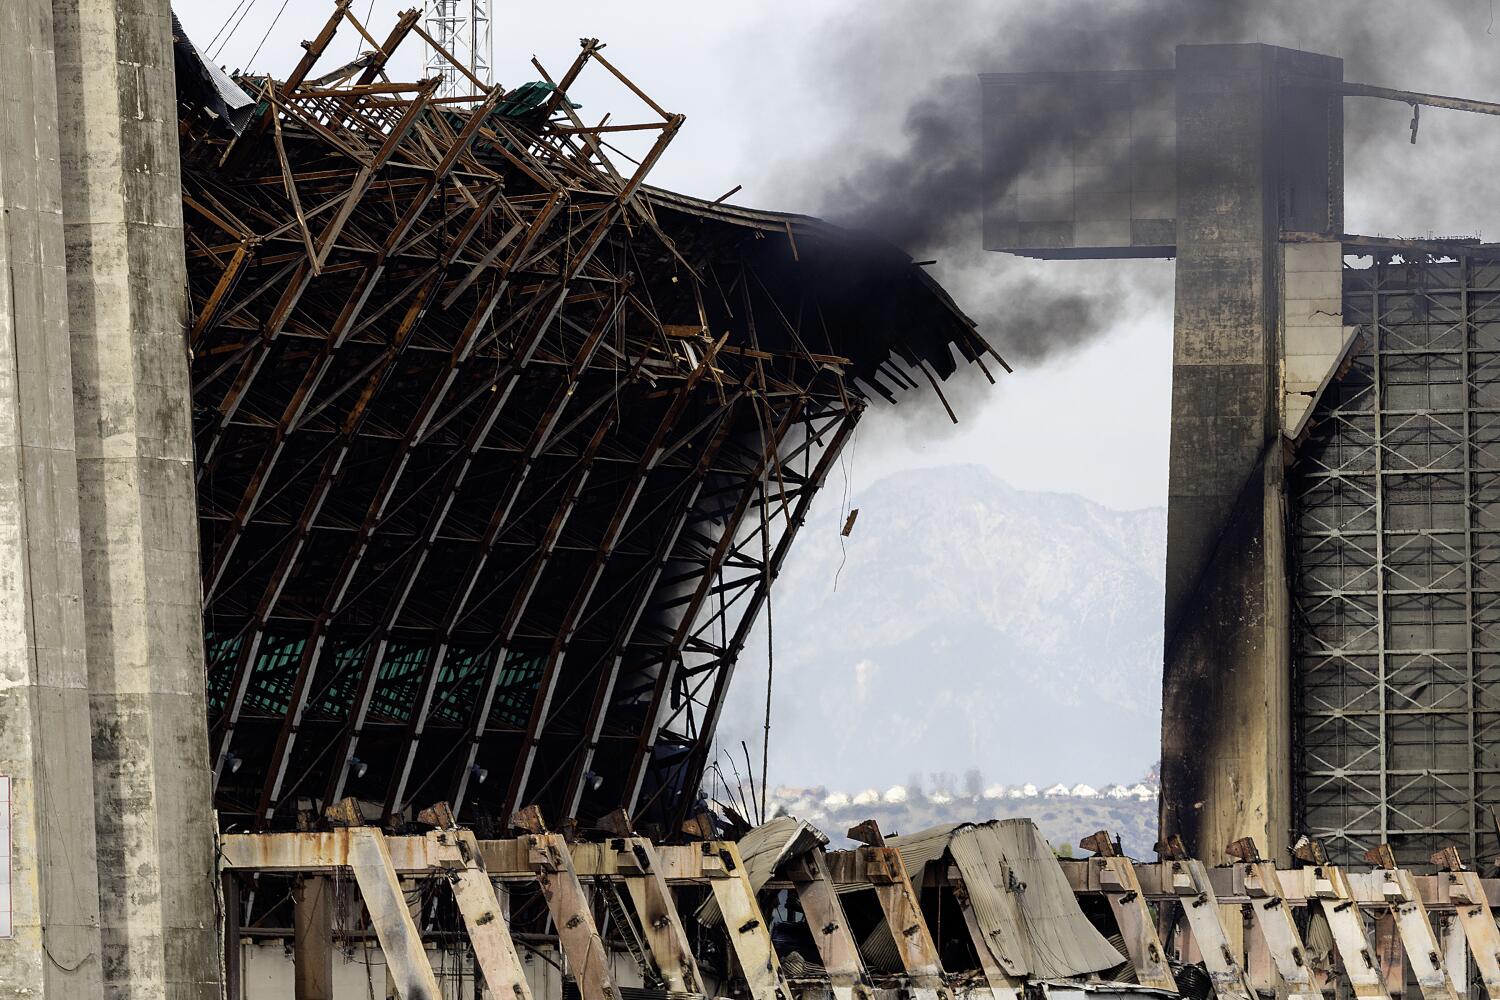 Navy awards $6-million contract for cleanup of World War II hangar in Tustin that burned